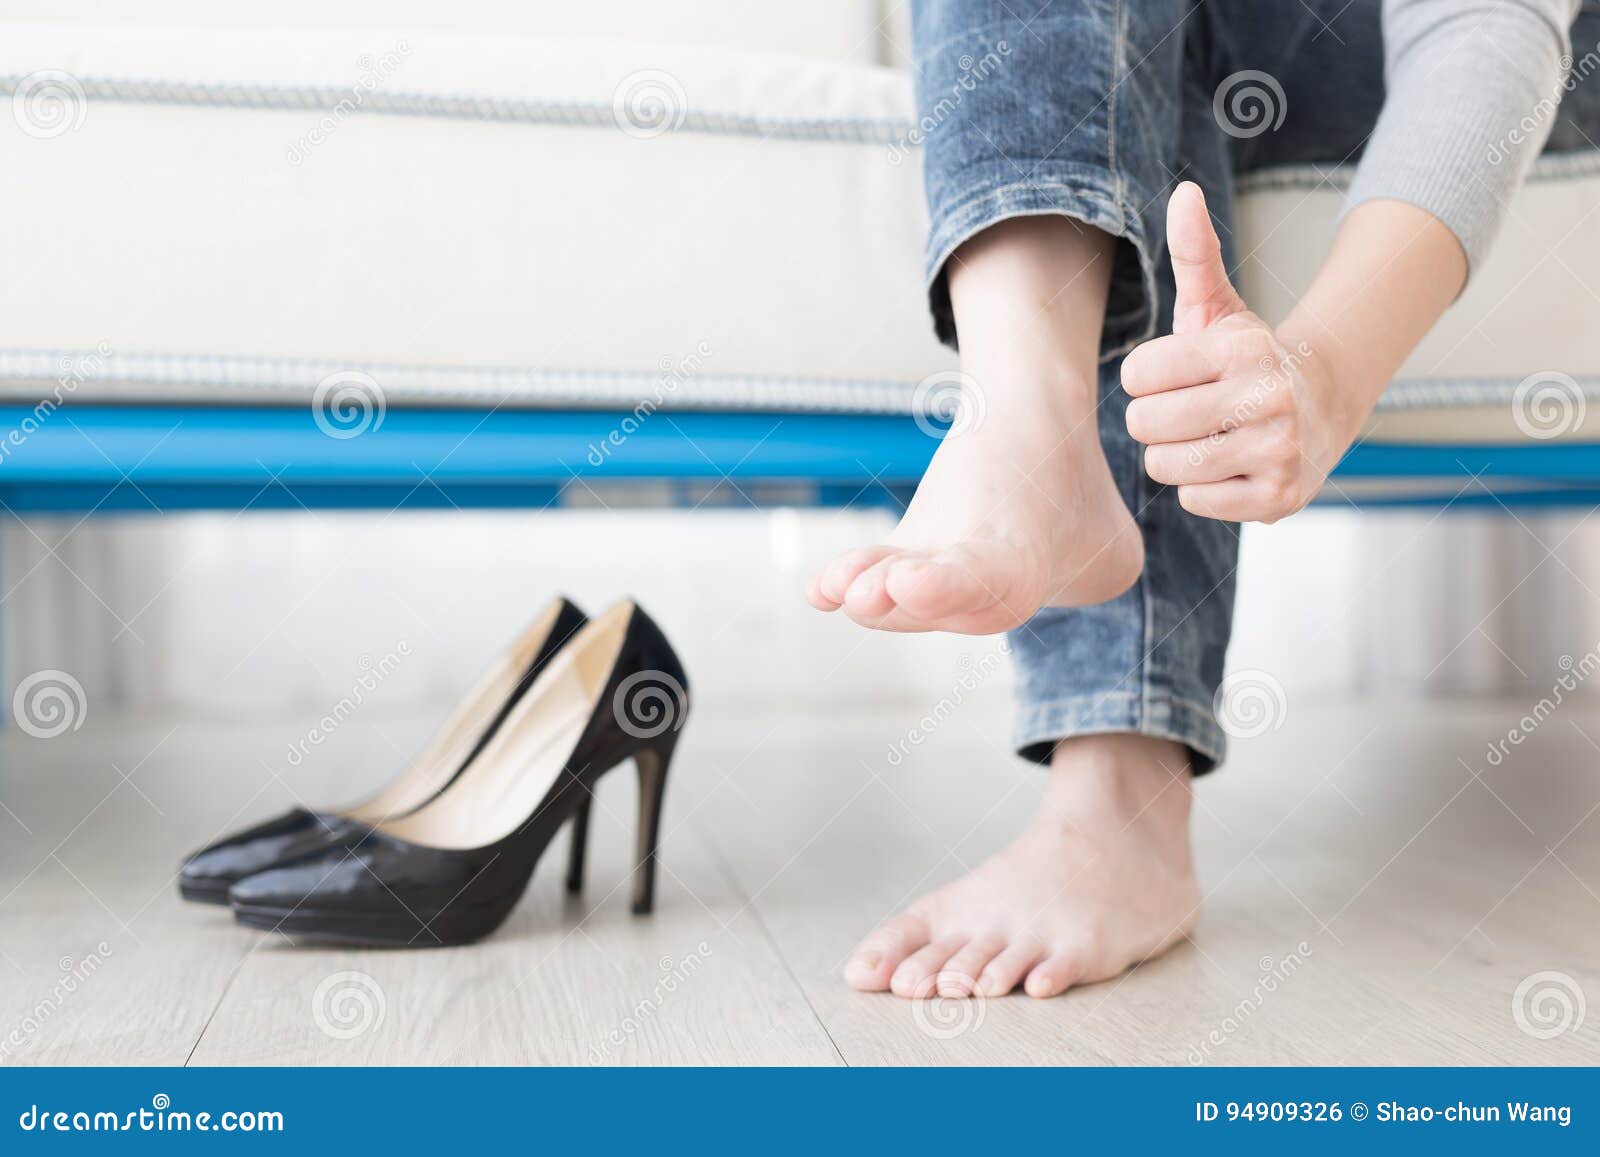 woman athlete`s foot